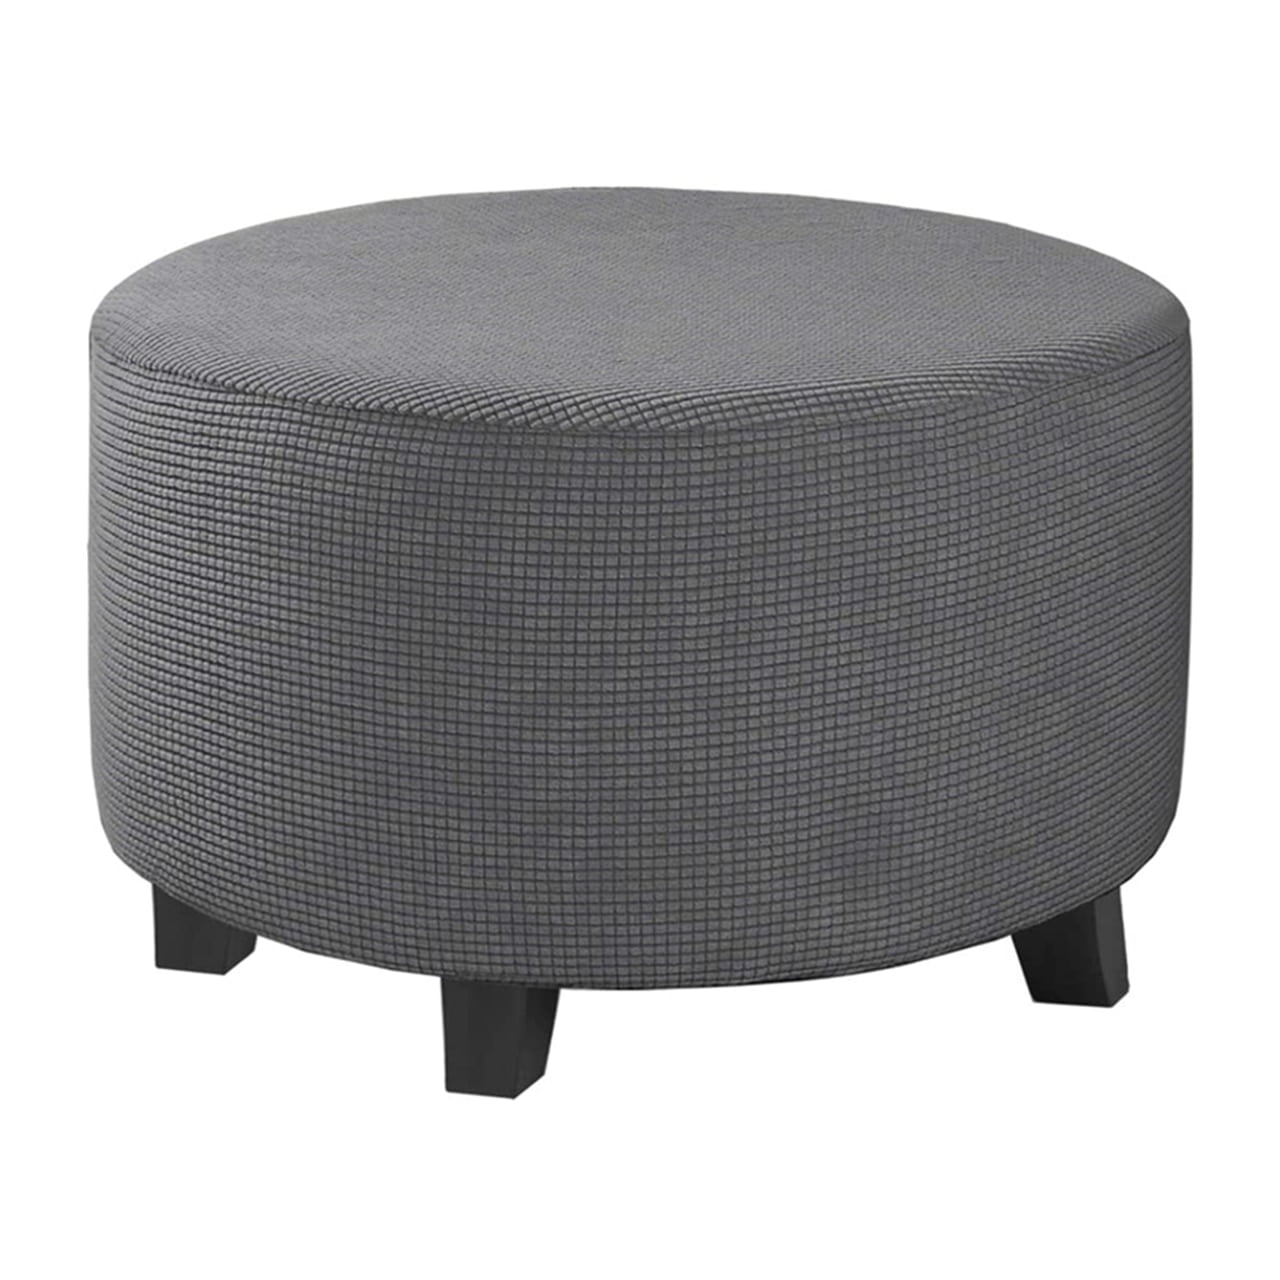 Stretch Ottoman Cover Square Velvet Ottoman Slipcover Elastic FootStool Protector Foldable Folding Storage Stool Furniture Protector Machine Washable For Kids Pets-grey-square 